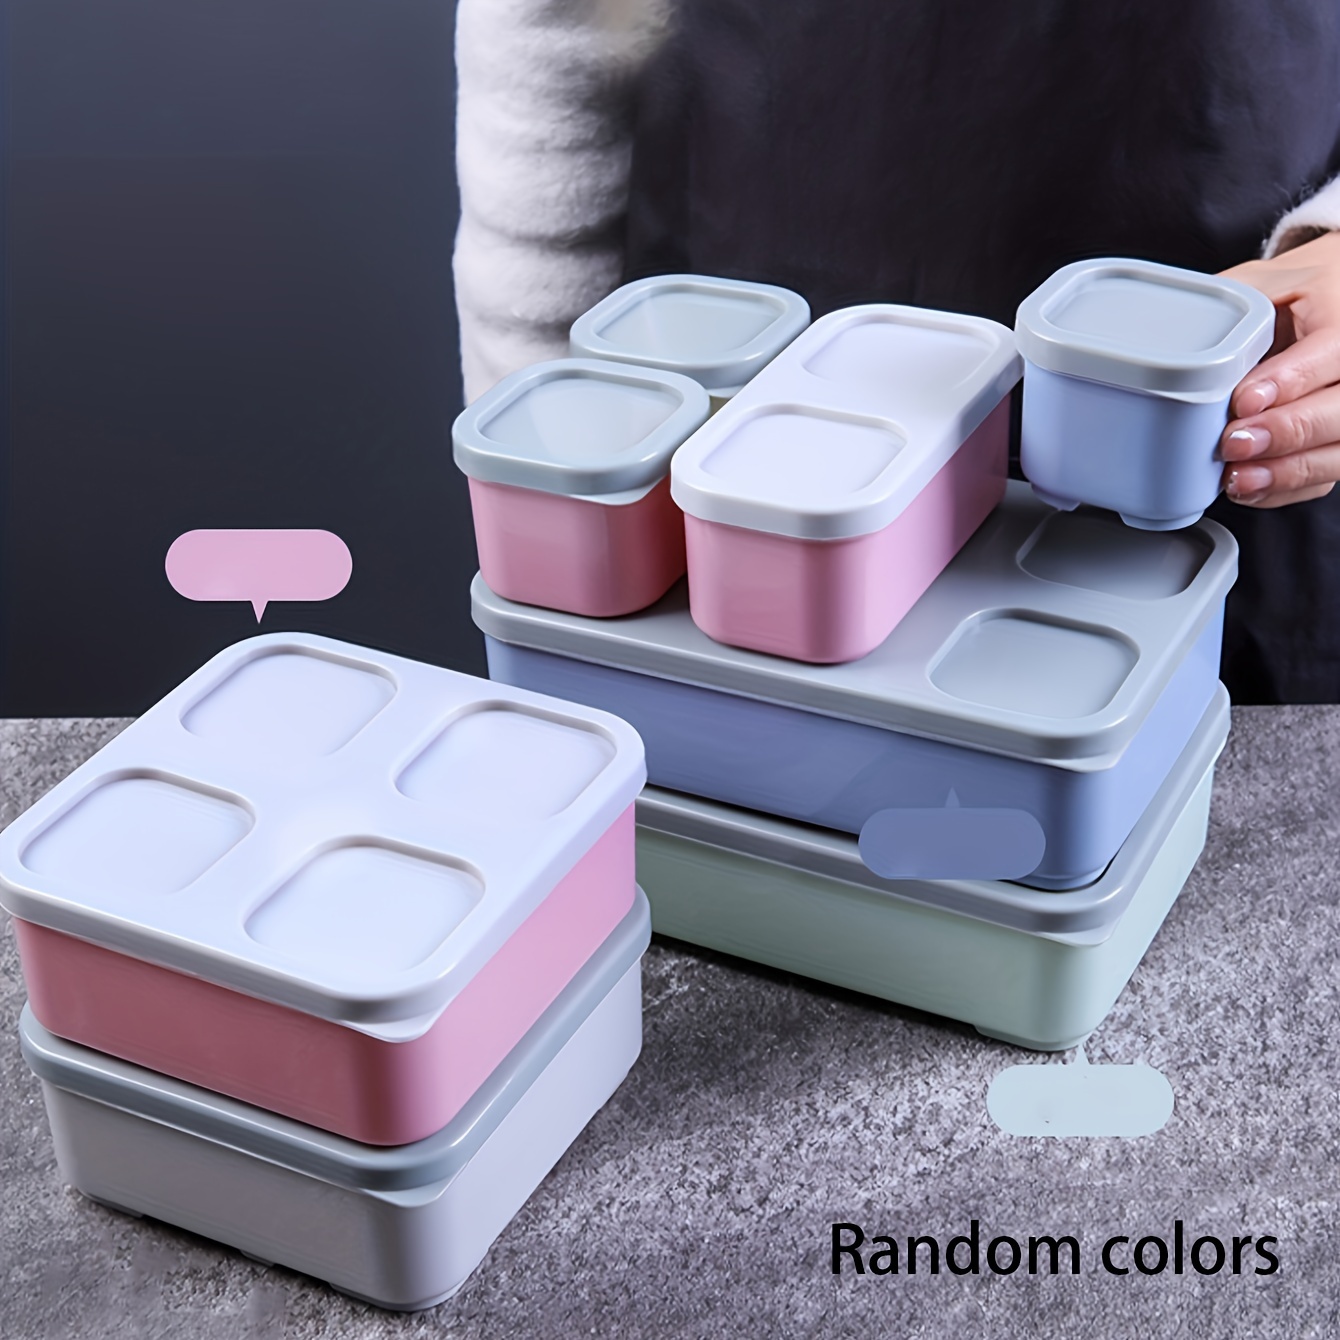 1-4 Layers Protable Lunch Box Stainless Steel Insulated Lunch Boxes Picnic  School Bento Food Container for Students Workers